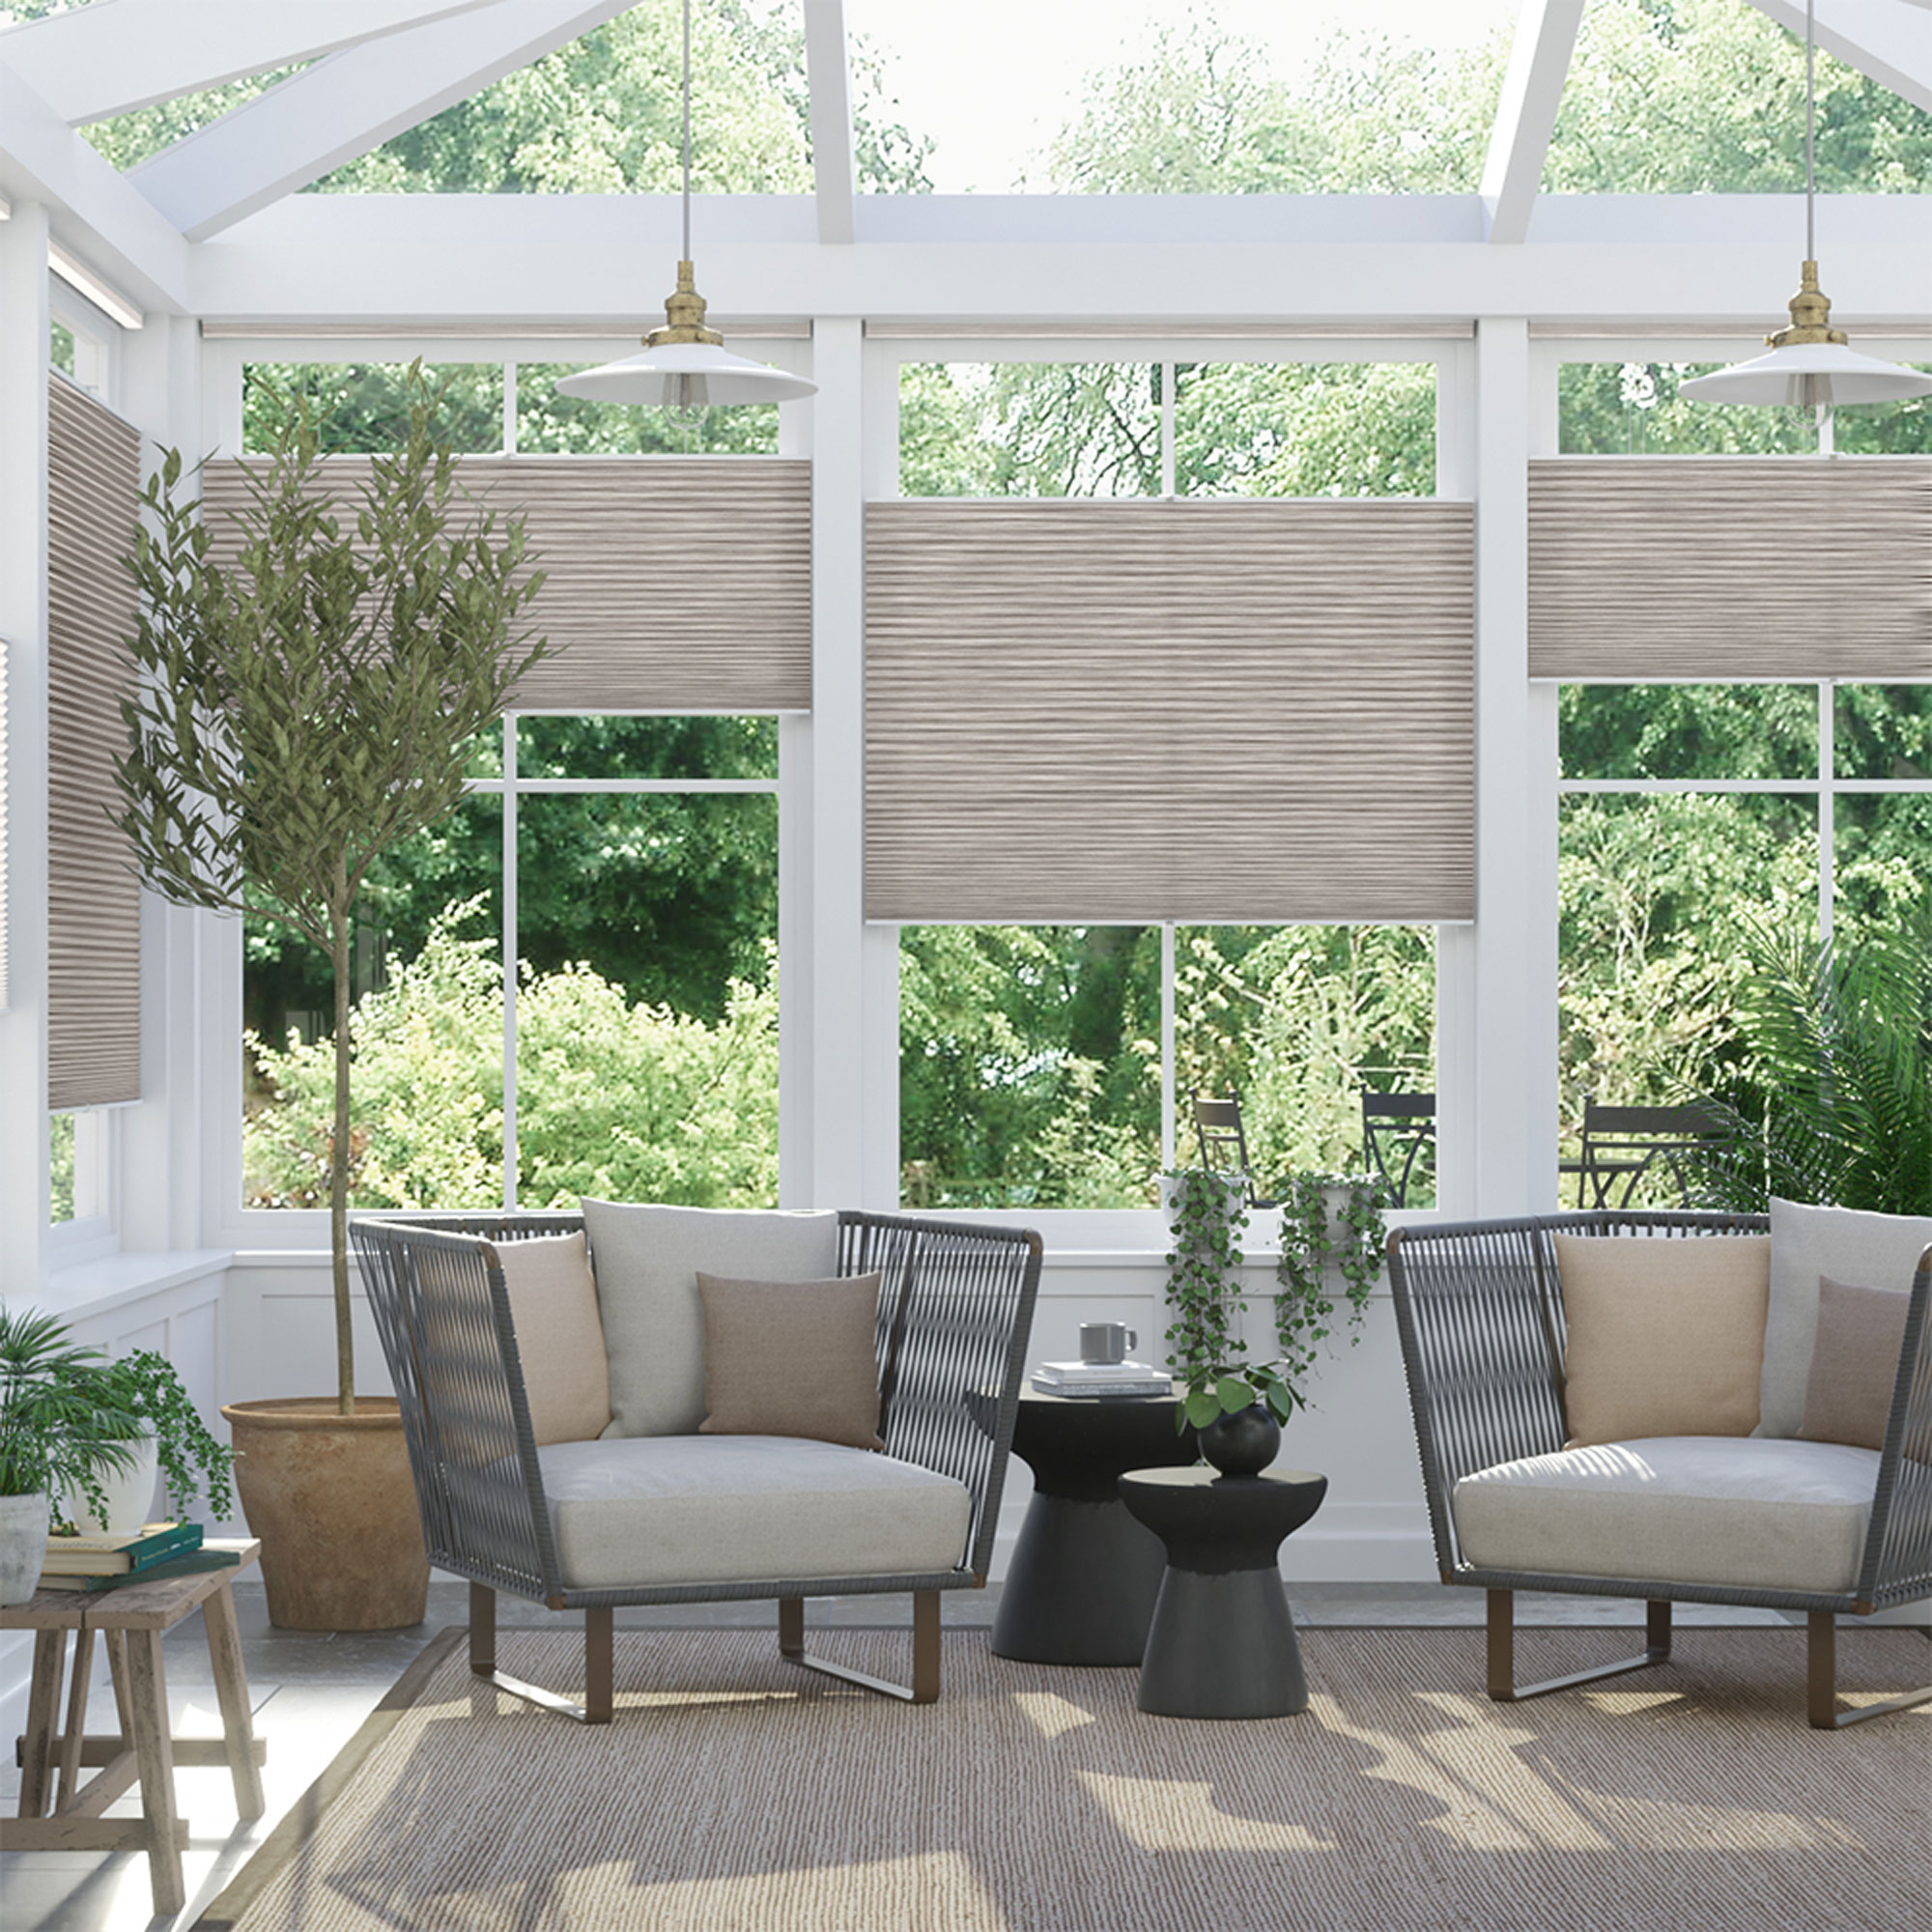 Conservatory with half window blinds, two armchairs and olive tree in pot